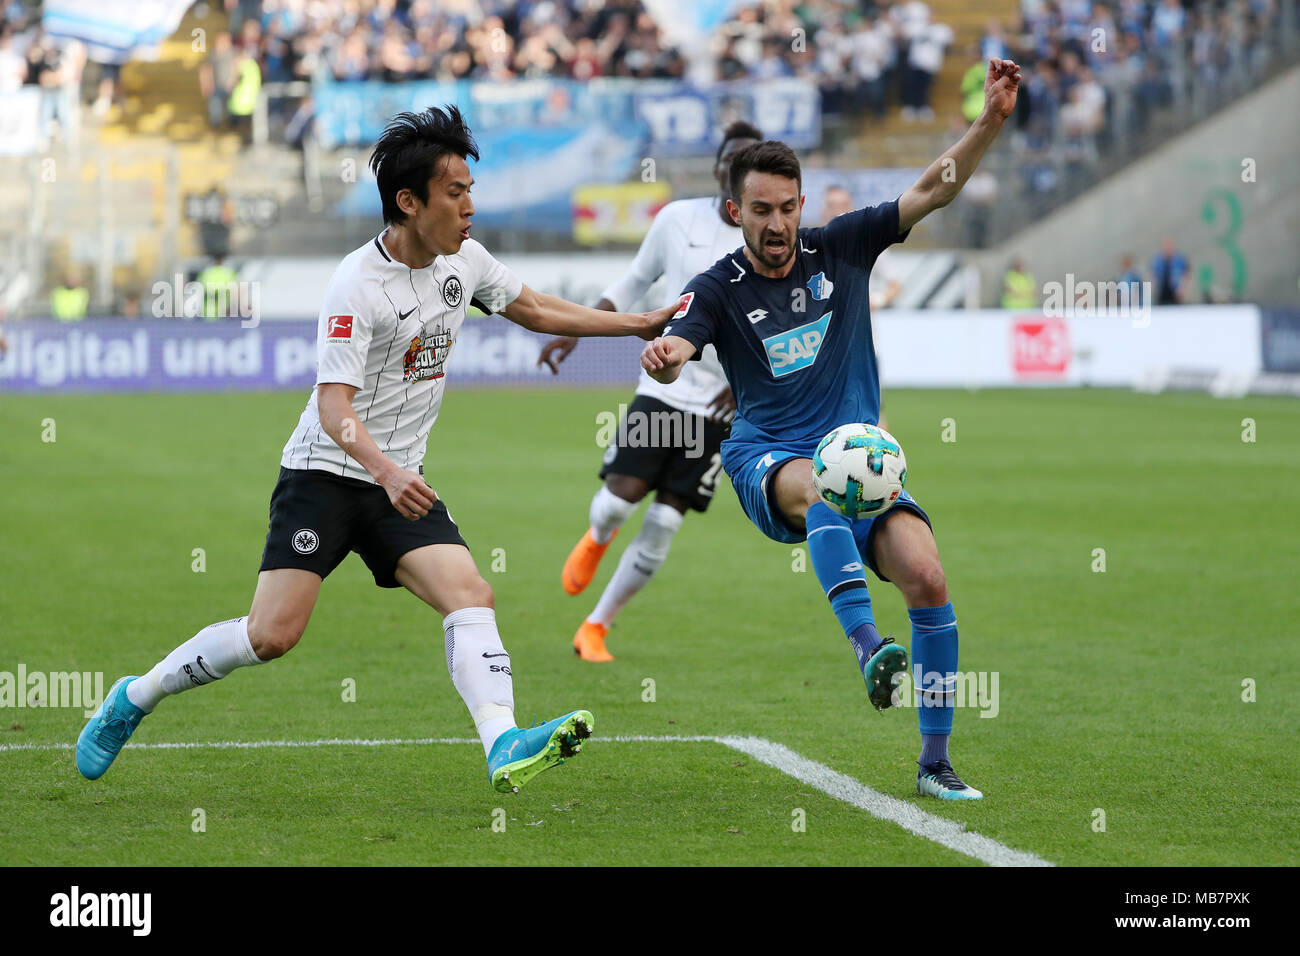 Frankfurt. 8th Apr, 2018. Makoto Hasebe (L) of Frankfurt vies with Lukas Rupp of Hoffenheim during the Bundesliga match between Eintracht Frankfurt and TSG 1899 Hoffenheim in Frankfurt Germany, April 8, 2018. The match ended with 1-1. Credit: Ulrich Hufnagel/Xinhua/Alamy Live News Stock Photo